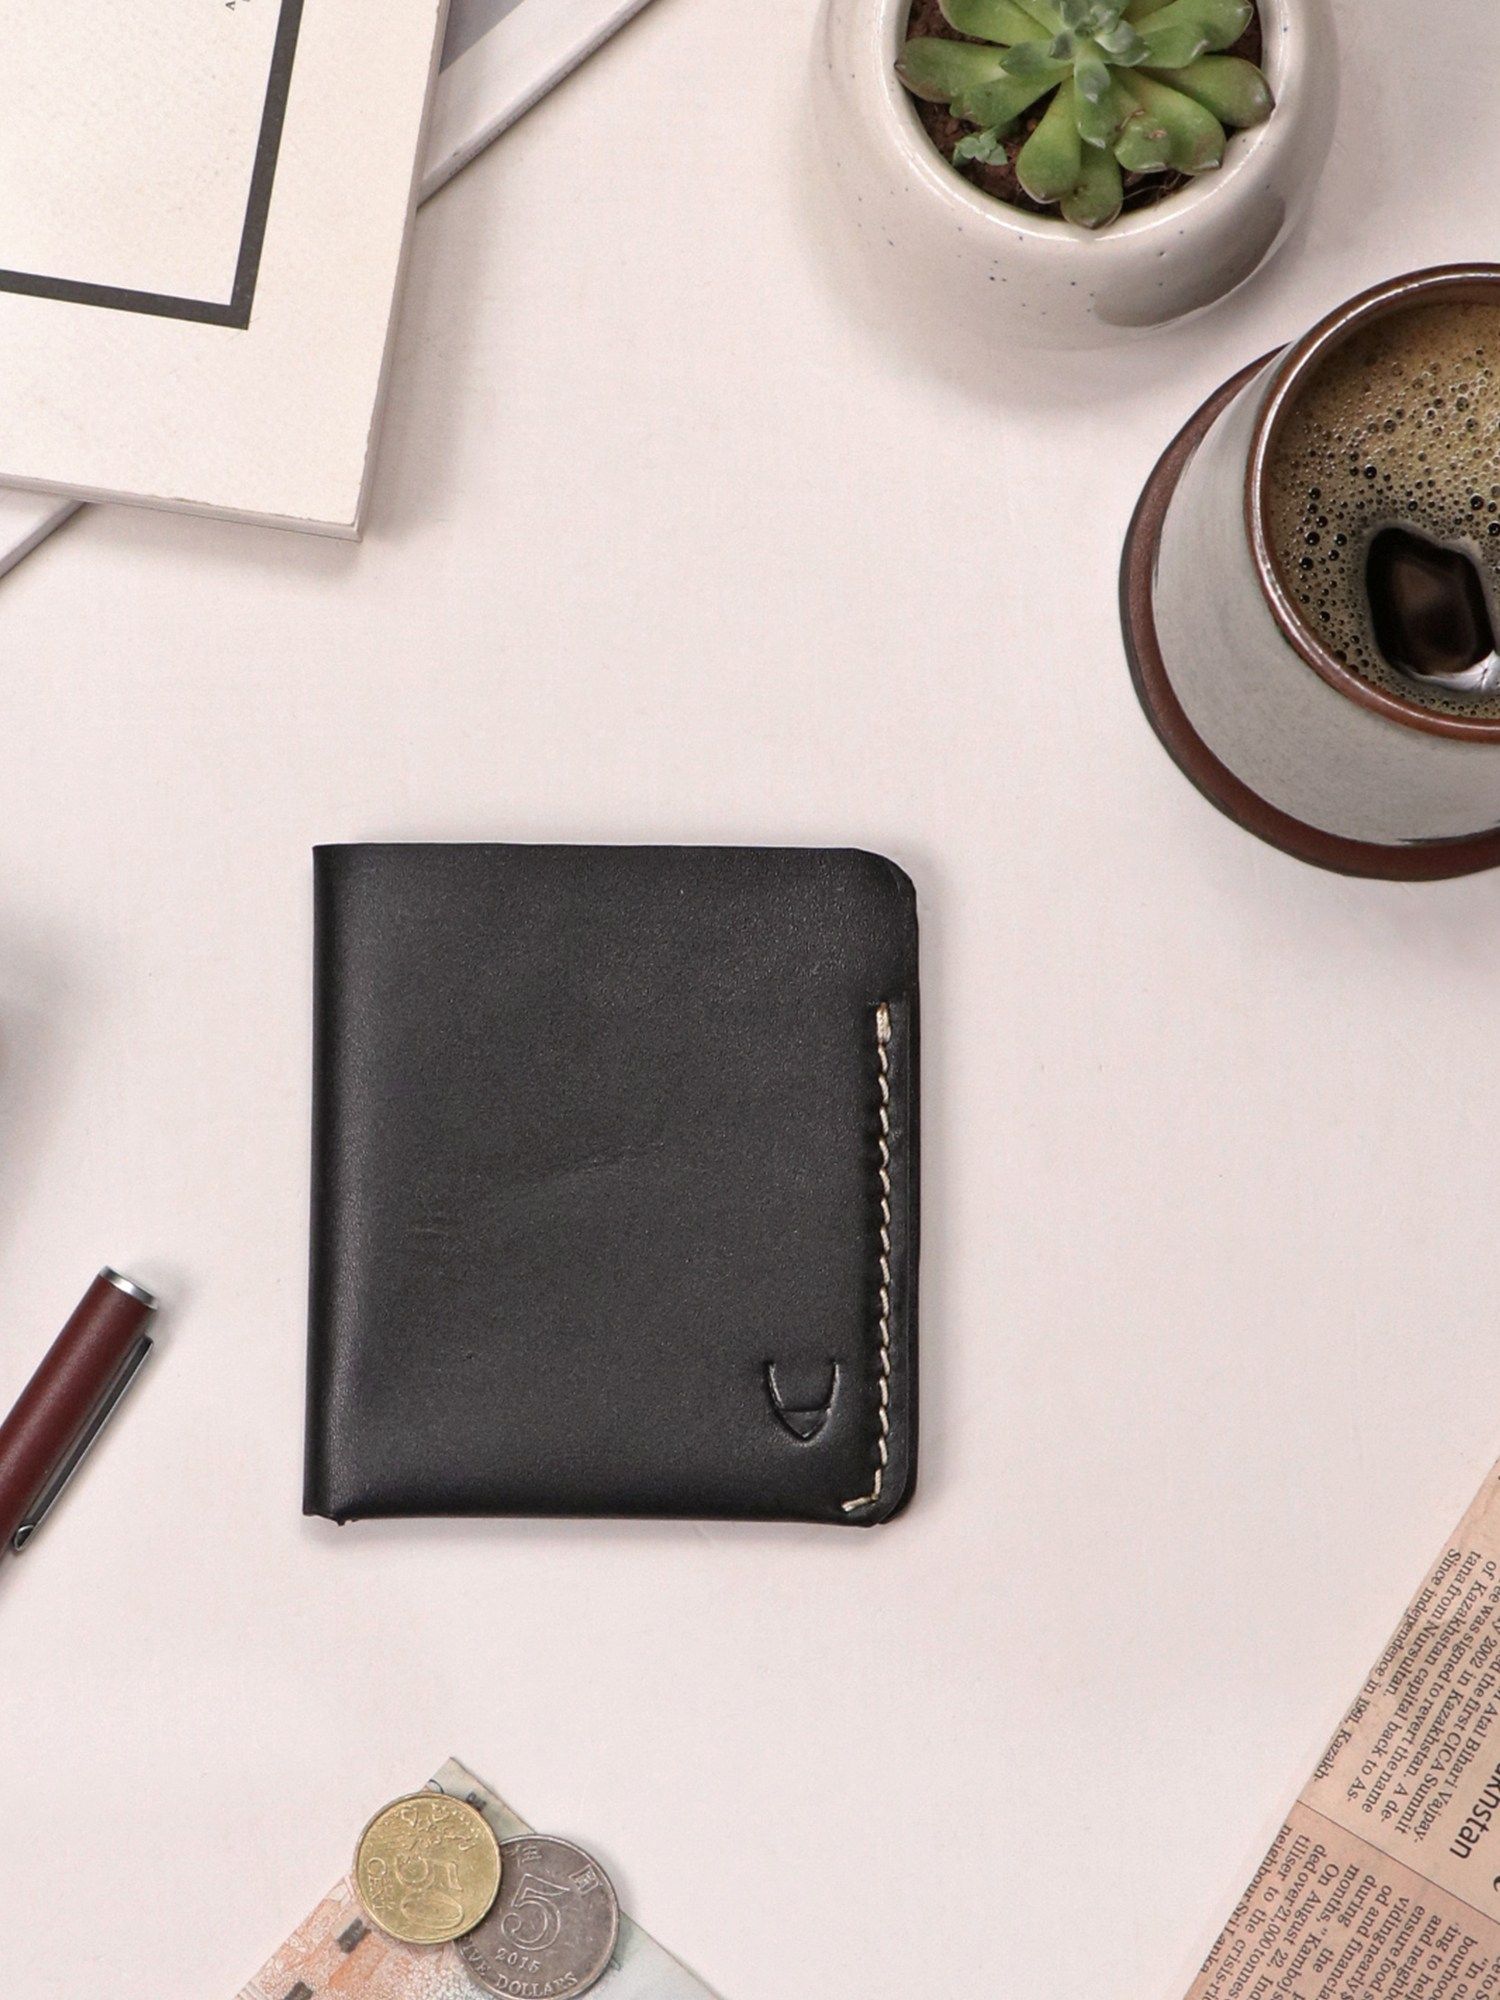 Hidesign Wallets & Card Holders sale - discounted price | FASHIOLA INDIA